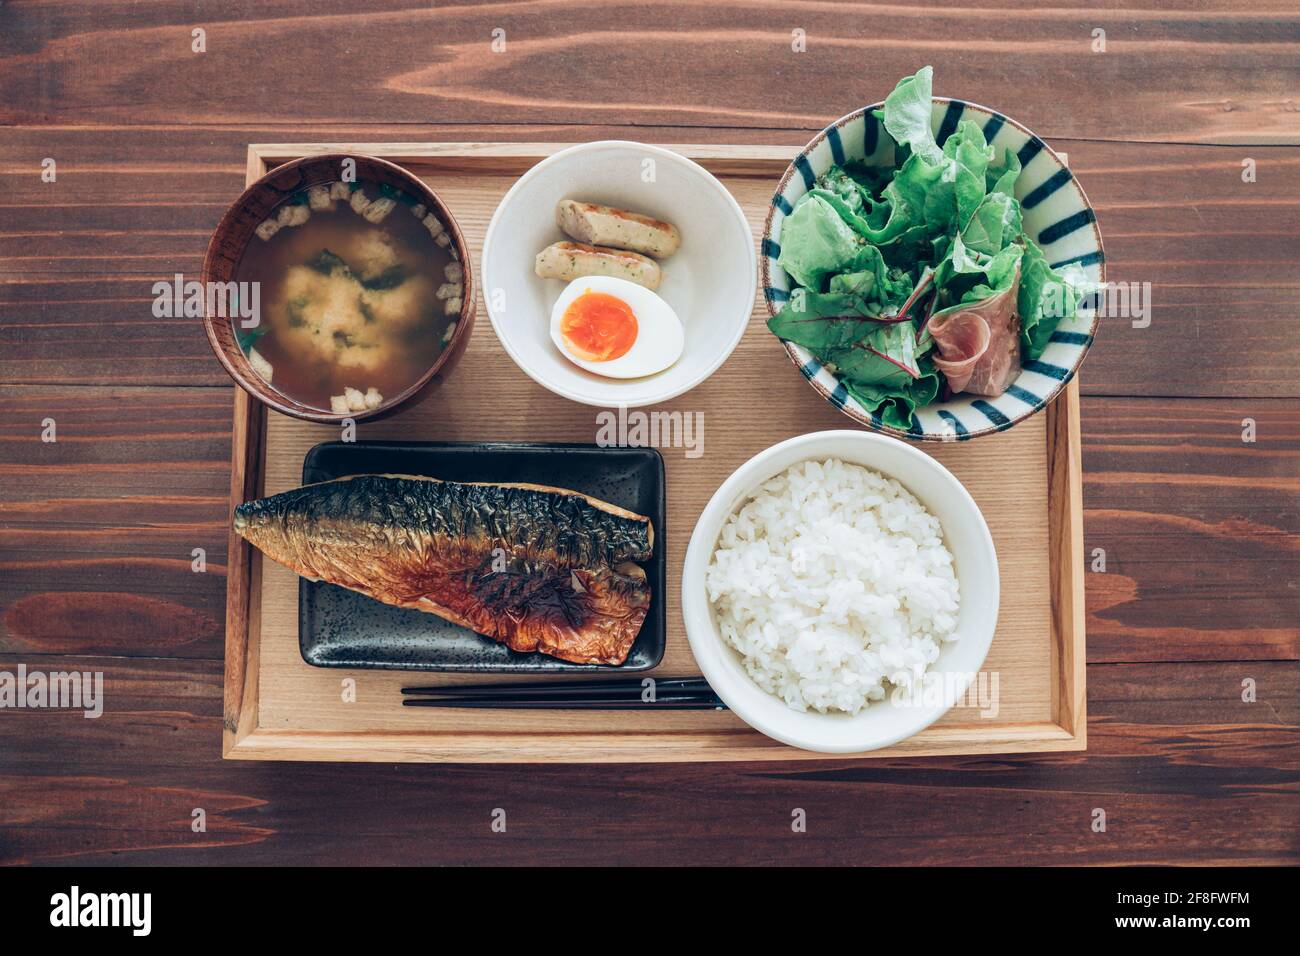 Japanese set lunch, grilled mackerel fish with miso soup and salad Stock Photo